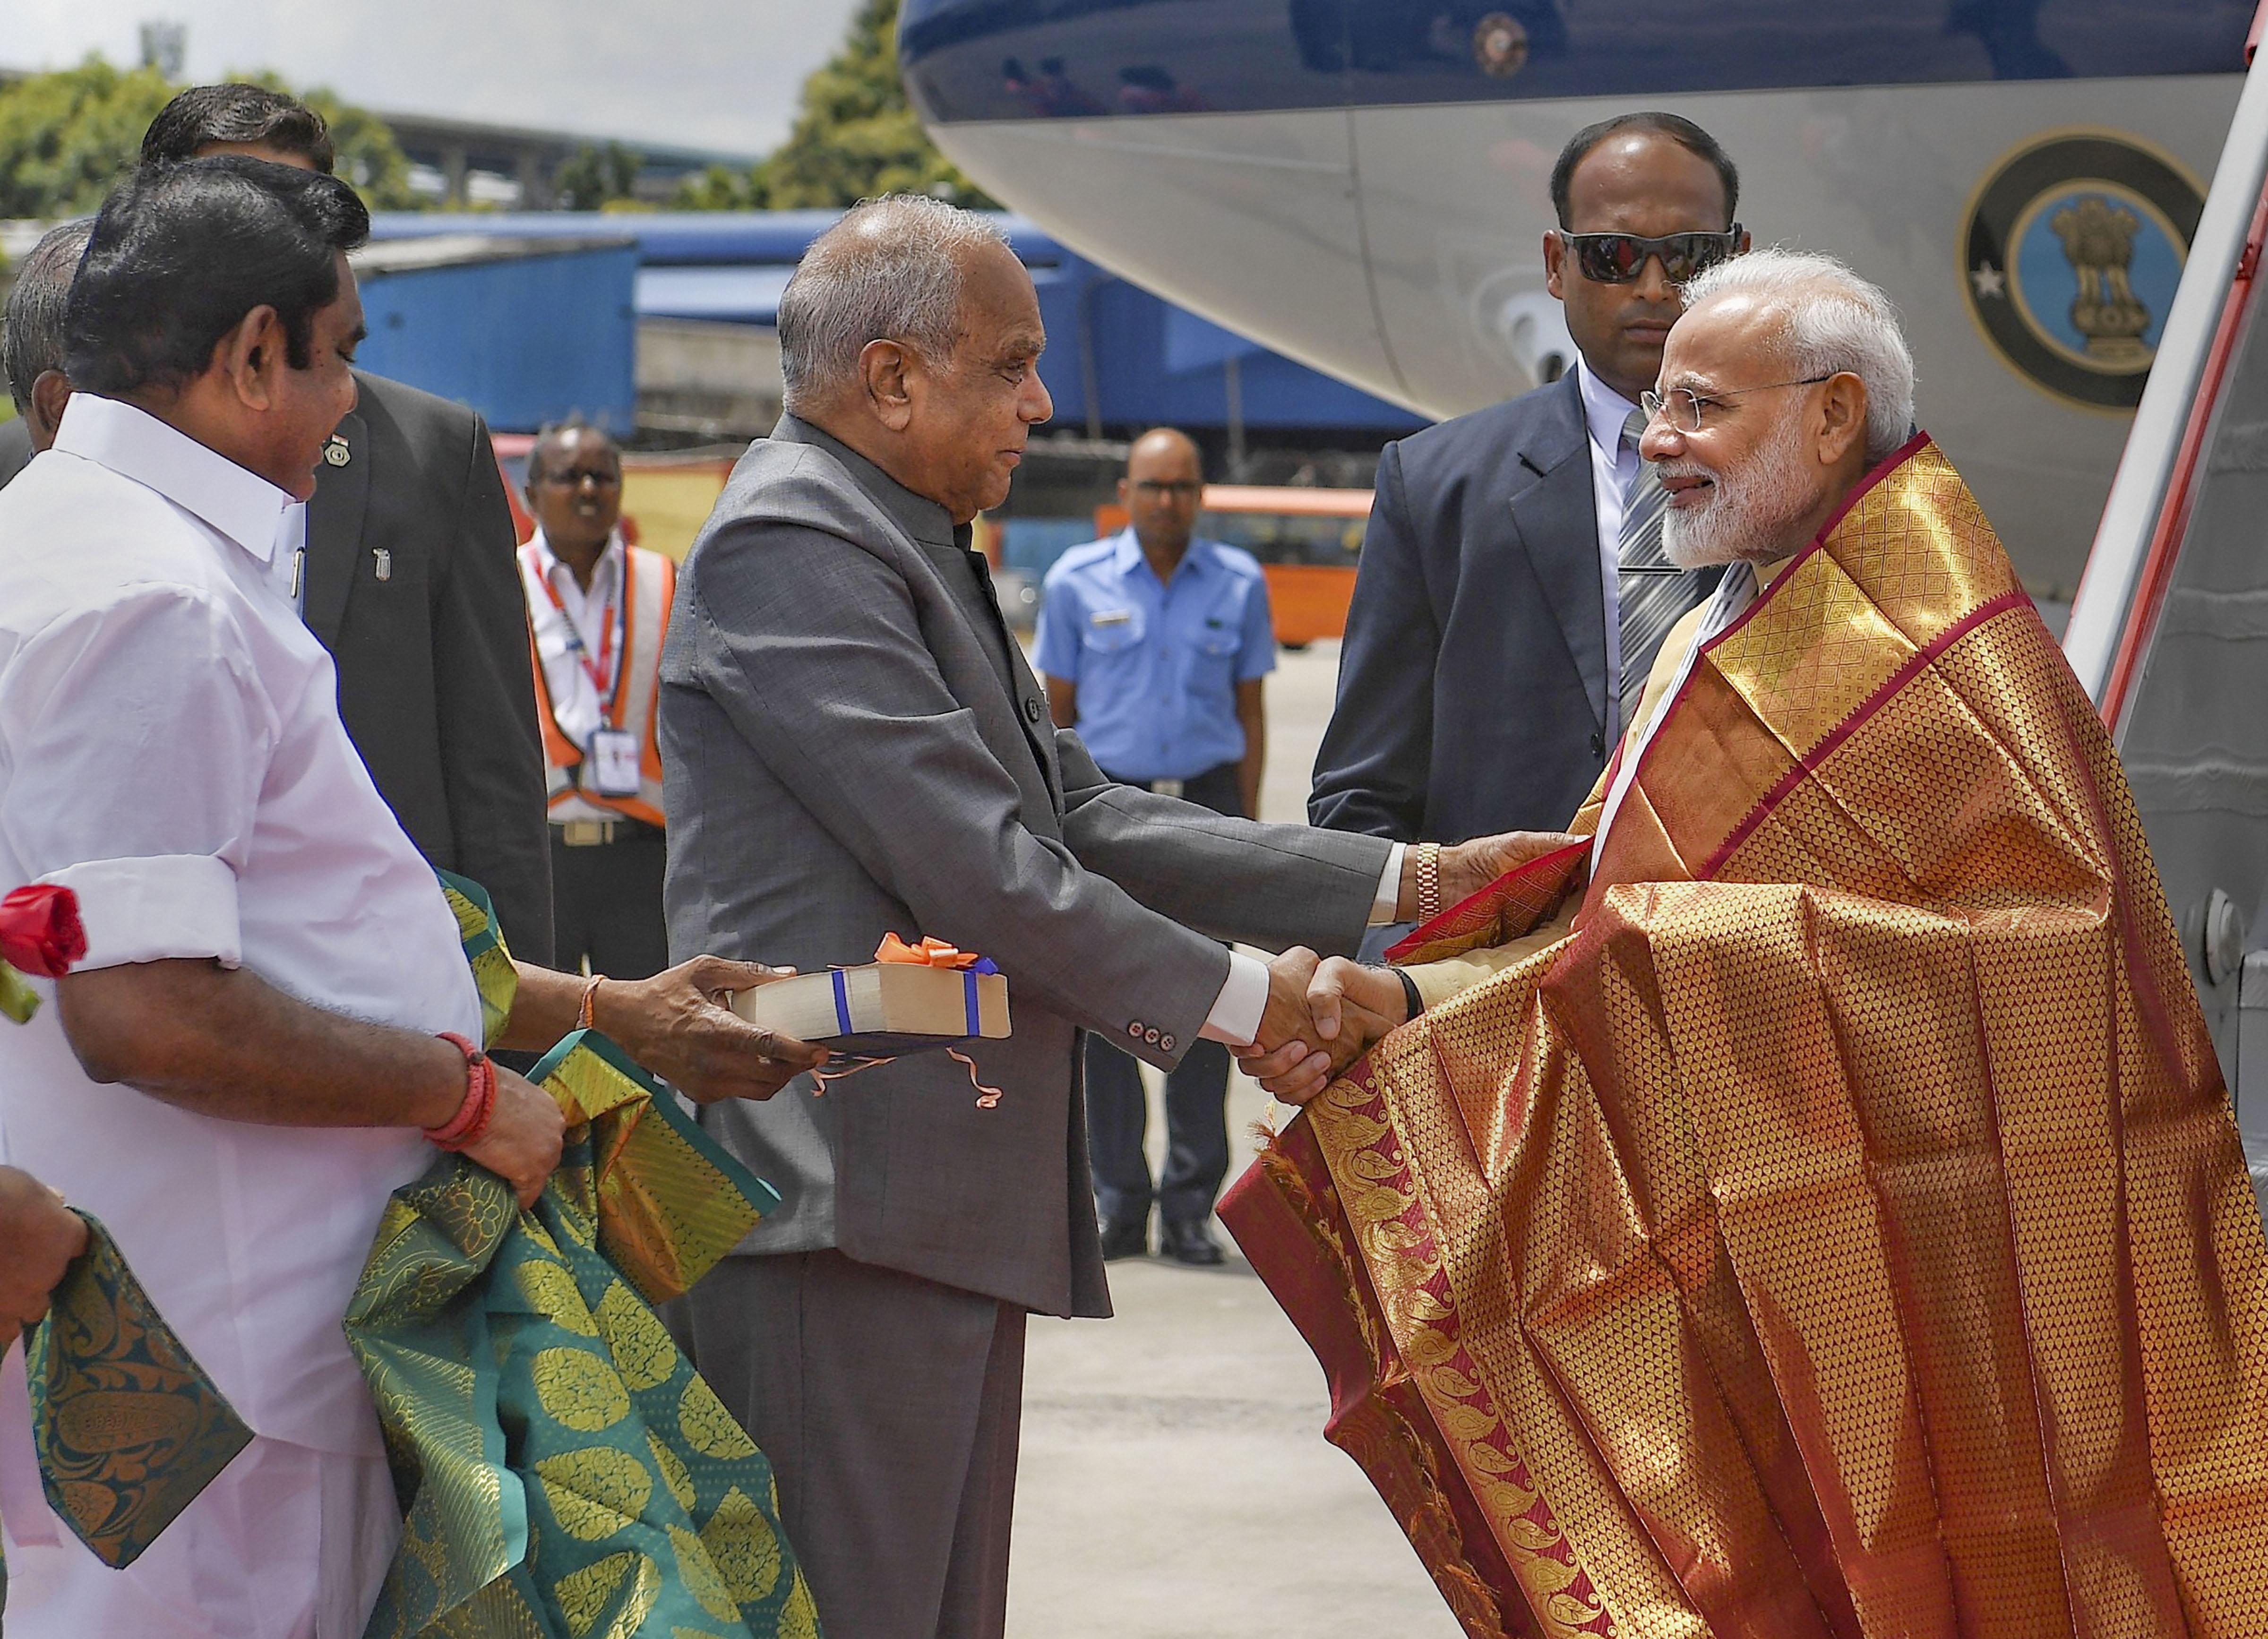 Prime Minister Narendra Modi being welcomed by Tamil Nadu Governor Banwarilal Purohit on his arrival, in Chennai, Friday, Oct. 11, 2019. Modi has arrived in Chennai ahead of his informal summit with Chinese President Xi Jinping at Mamallapuram - PTI